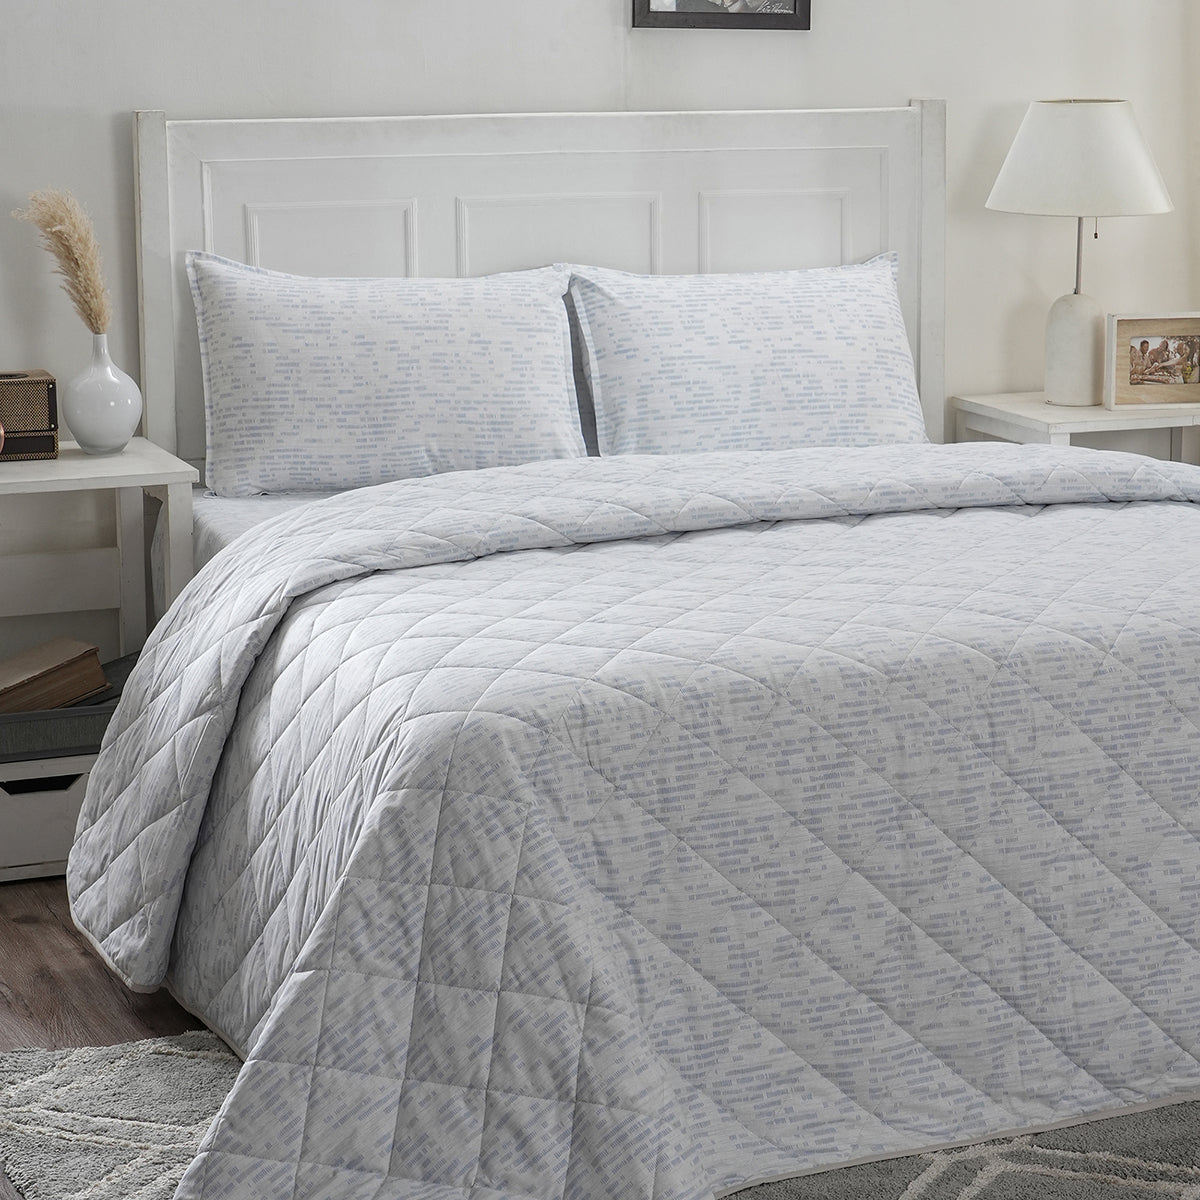 Optimist Bloom Canopus 4PC Quilt/Quilted Bed Cover Set